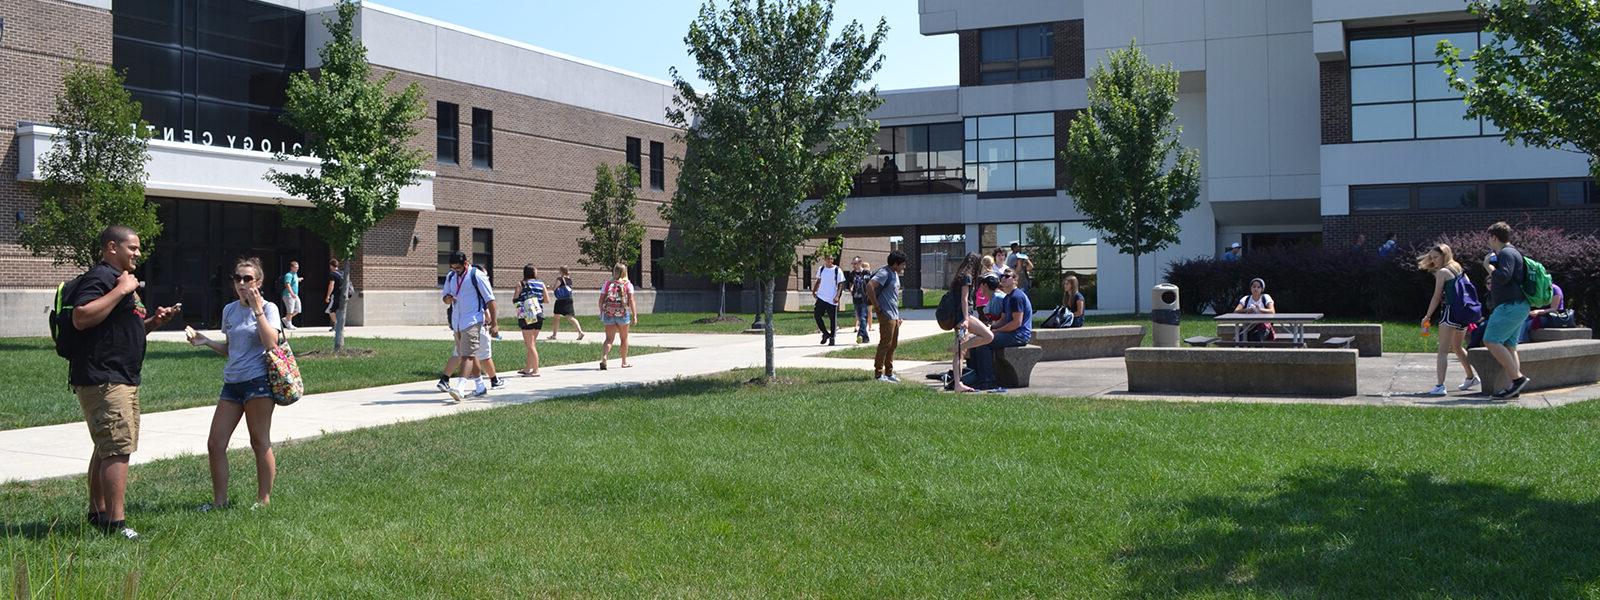 Image of students outside on campus